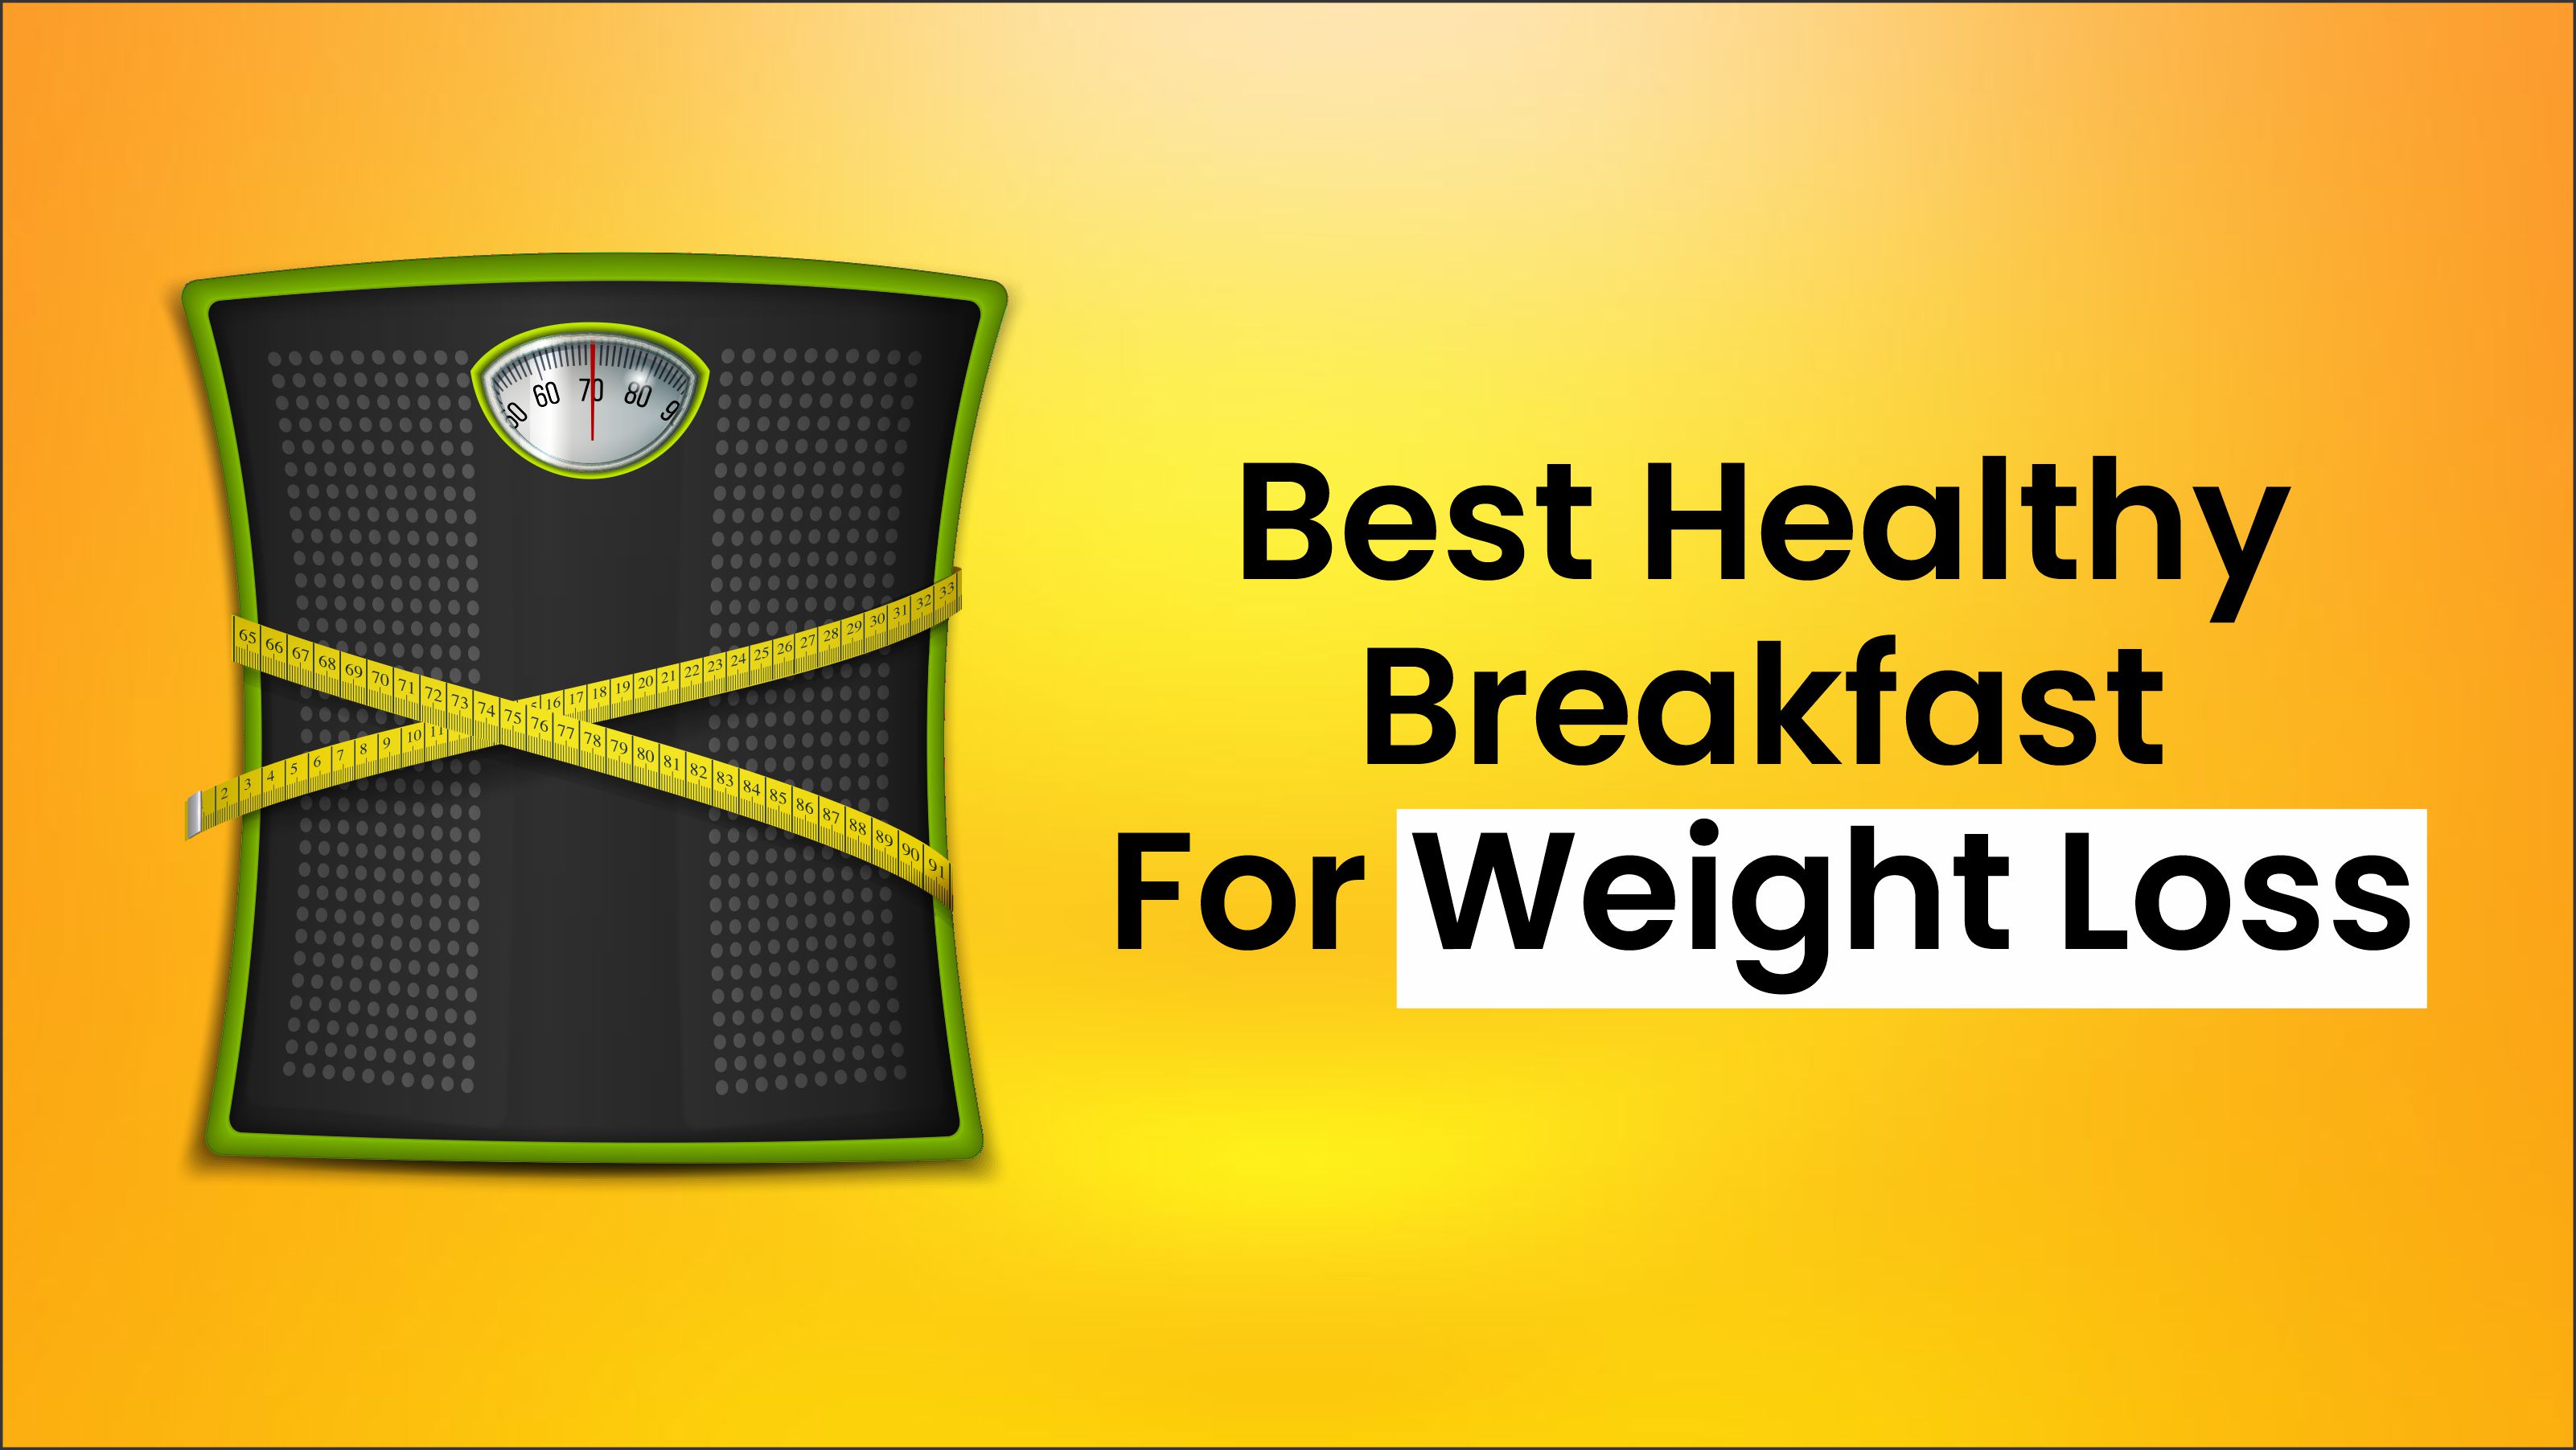 10 Best Healthy Breakfast For Weight Loss